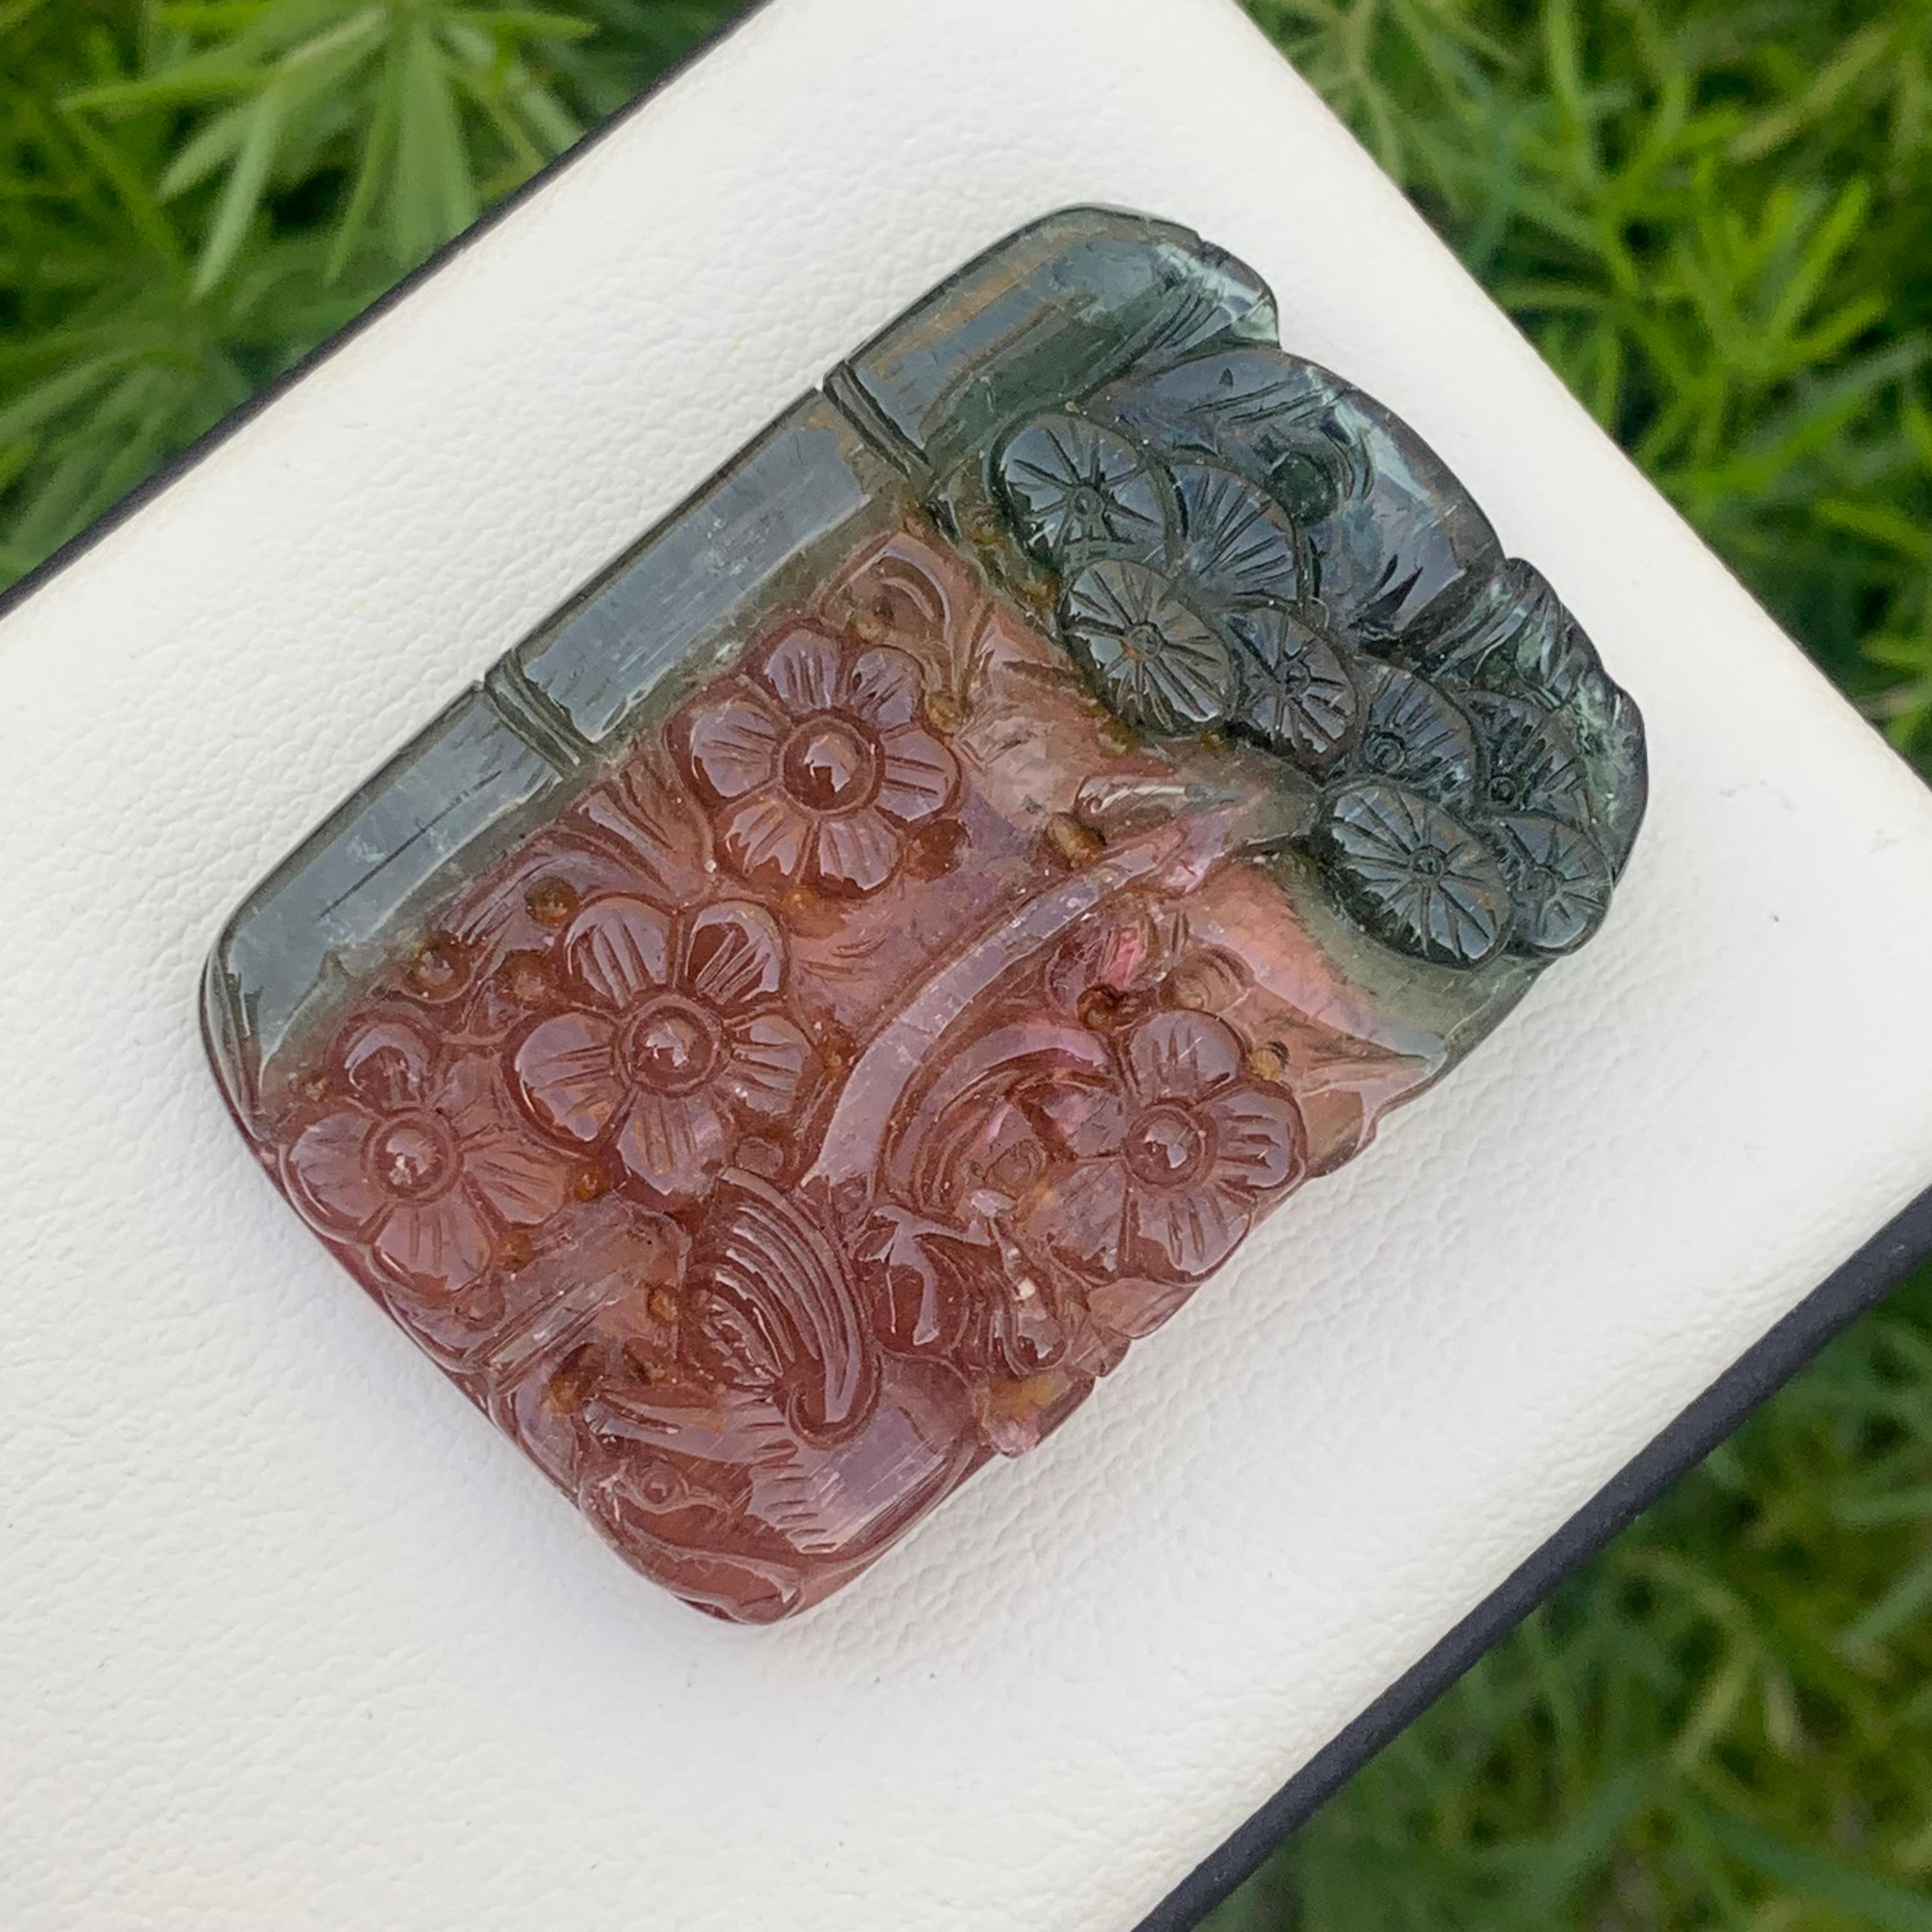 111.85 Carat Glamorous Natural Bi Color Flower Tourmaline Drilled Carving 
Weight: 111.85 Carats
Dimension: 4.4 x 3.0 x 0.7 Cm
Origin: Africa
Color: Red & Green
Shape: Carving
Quality: AAA
Bicolor tourmaline is connected to the heart chakra,